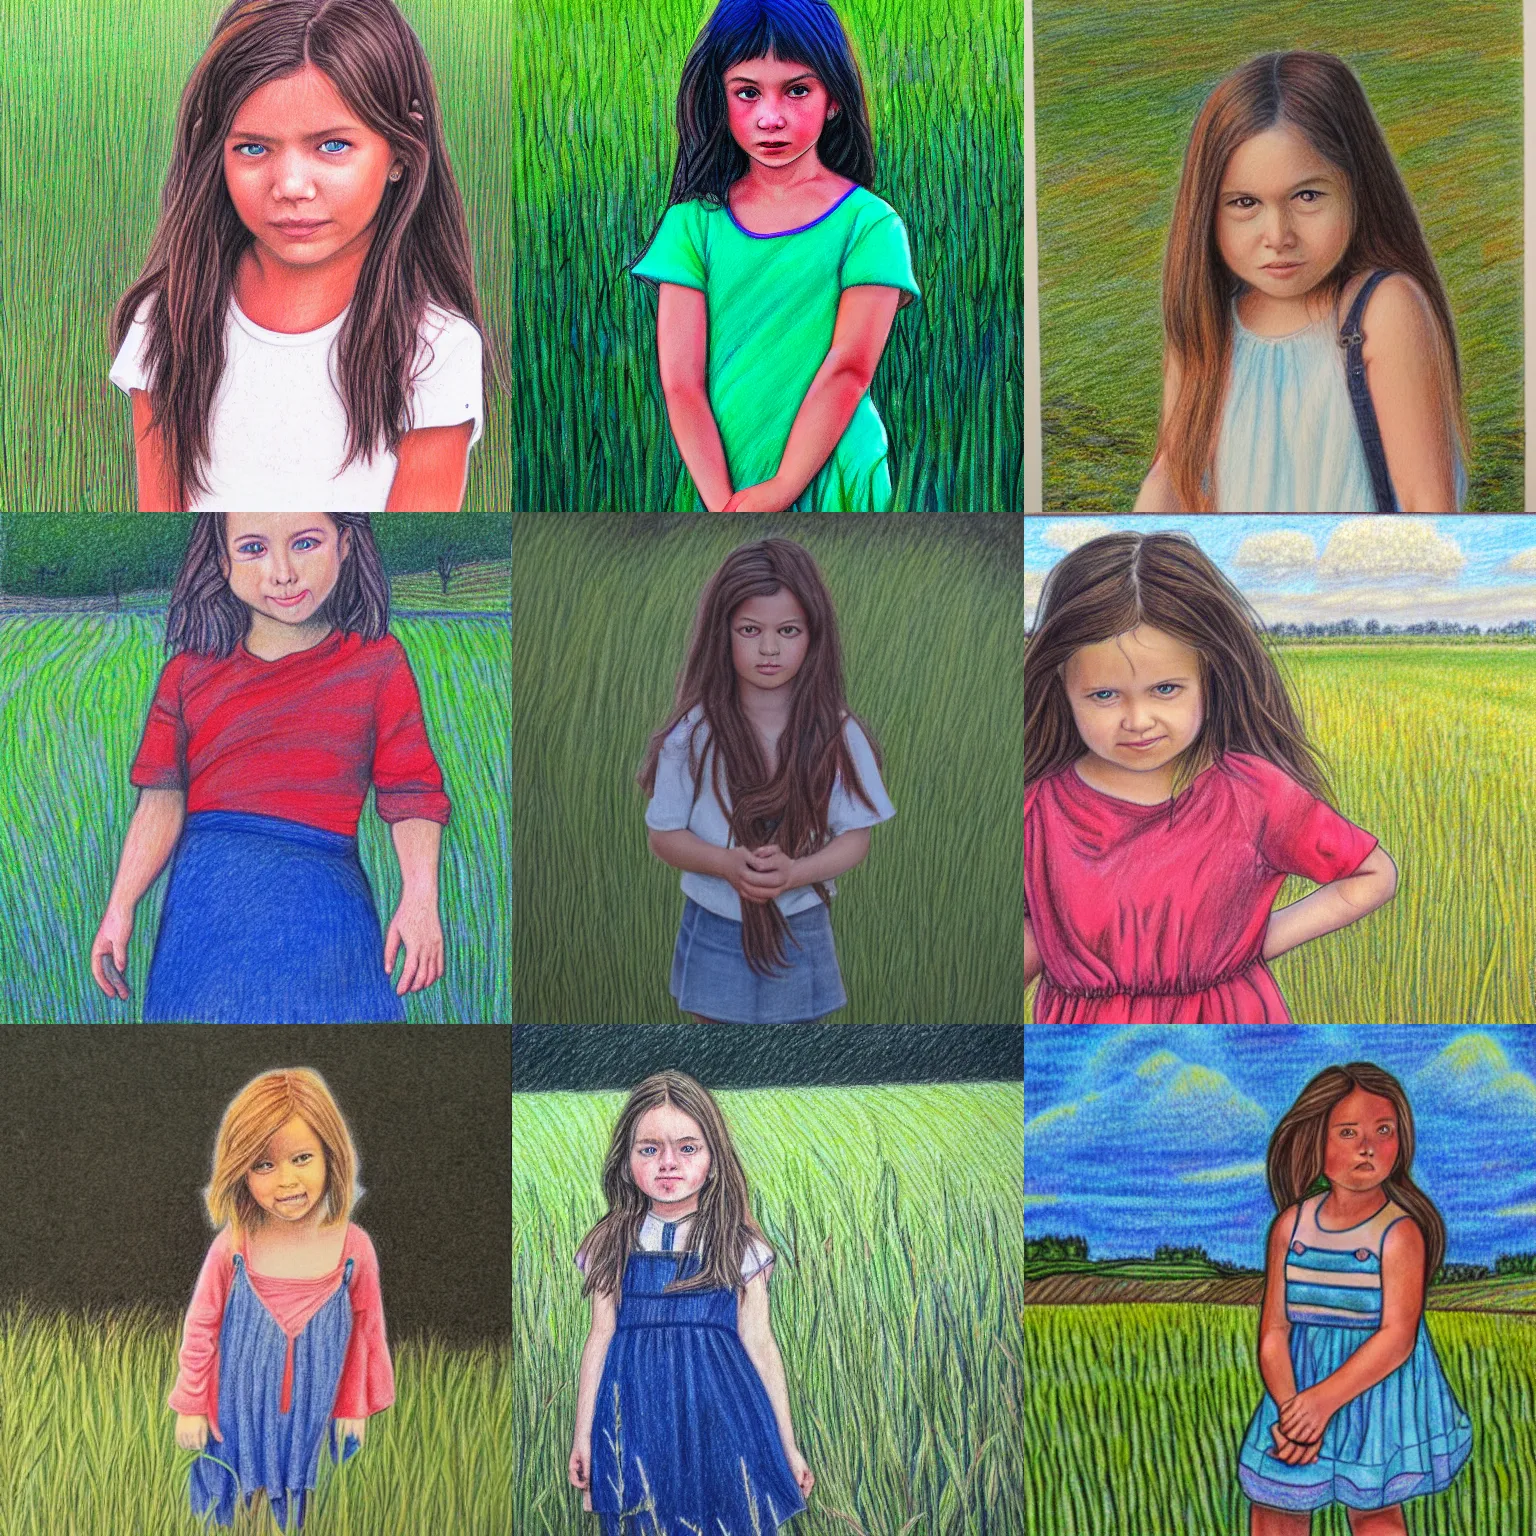 Prompt: portrait colored pencil drawing of mischievous girl standing in field looking at camera.